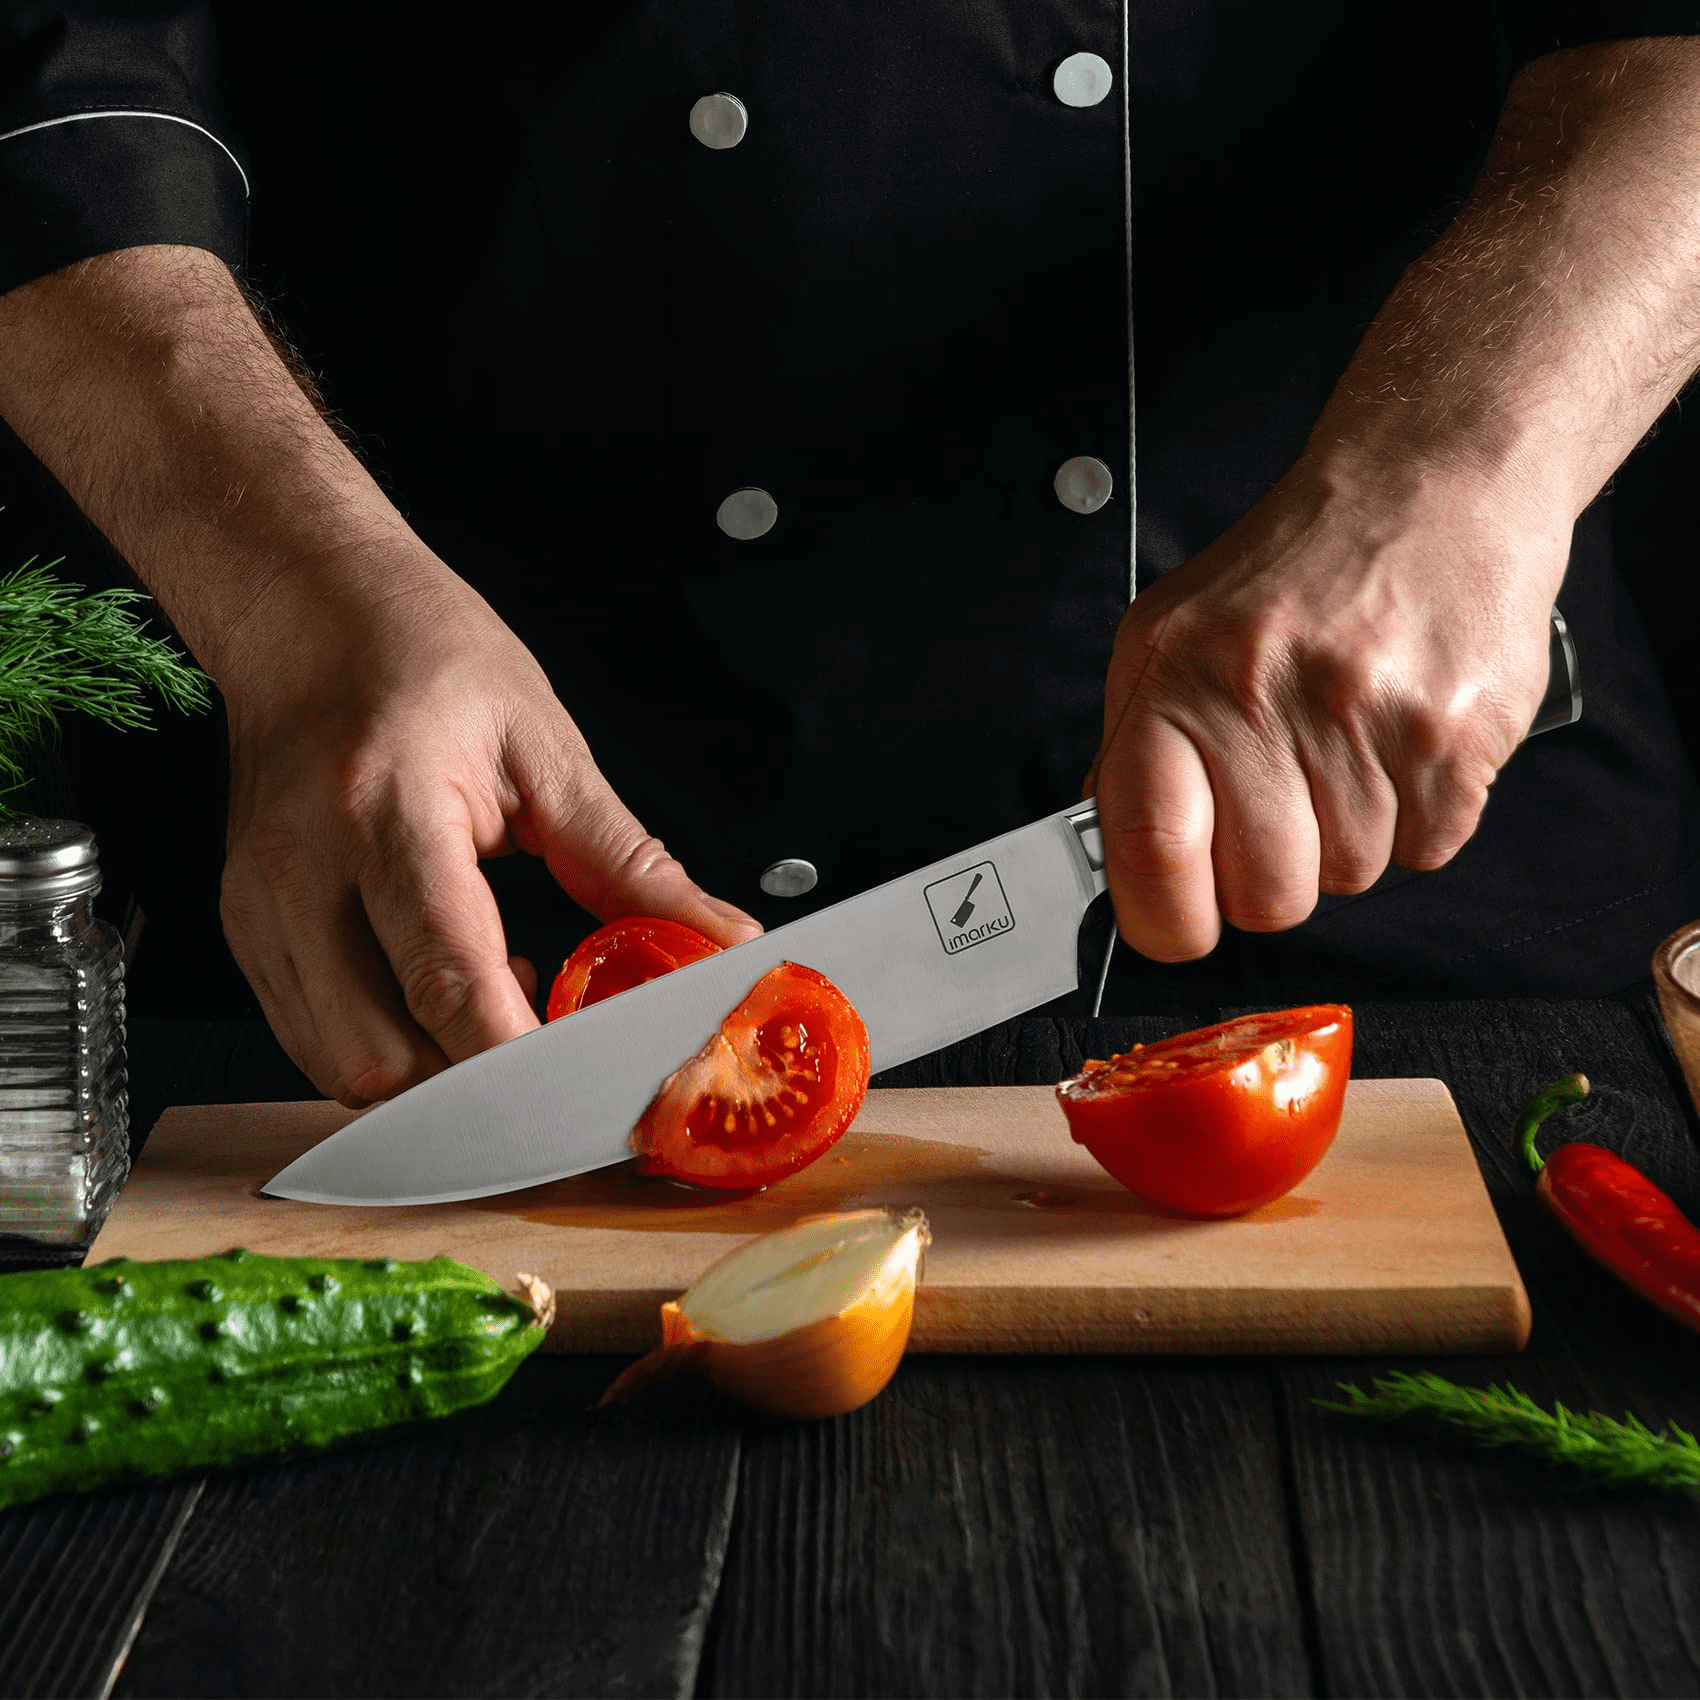 imarku Chef Knife 8 inch, High-Carbon Stainless Steel Pro Kitchen Knife  with Ergonomic Handle and Gift Box, Chef's Knives for Professional Use,  Gifts